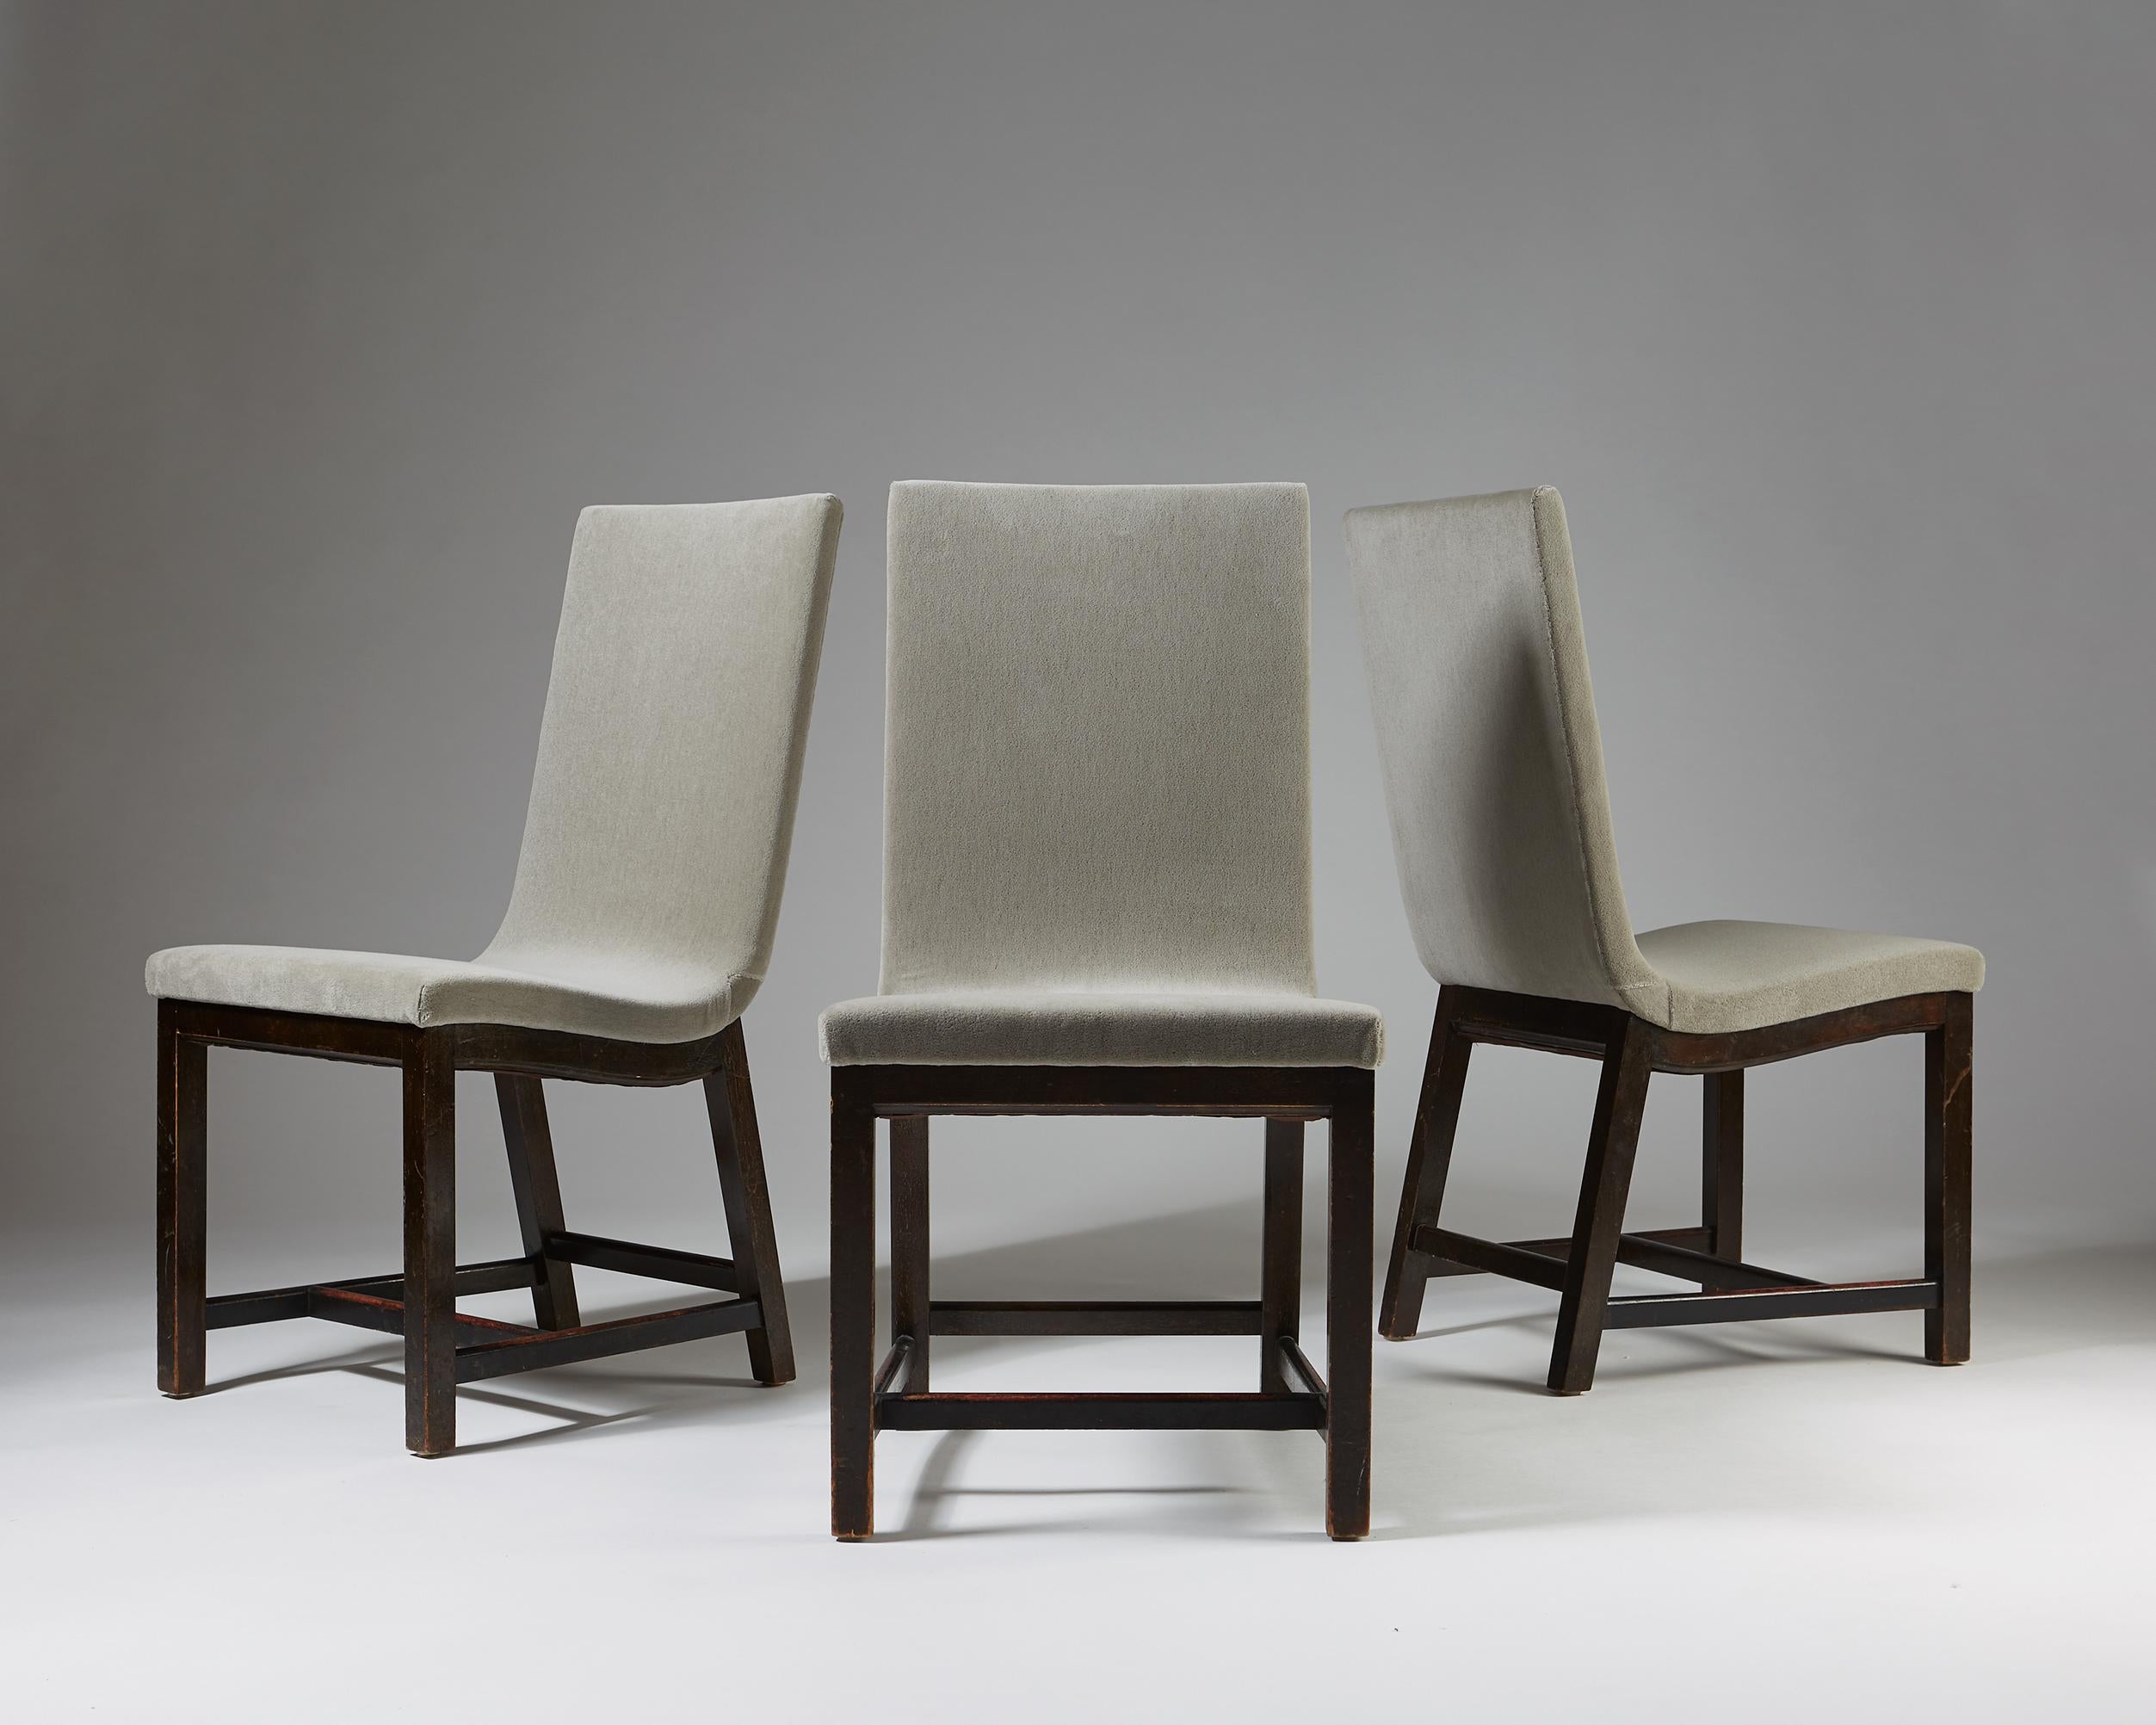 Set of three chairs “Typenko” designed by Axel Einar Hjorth for Nordiska Kompaniet,
Sweden. 1944.

Birch and velvet upholstery.

Dimensions:
H: 88 cm/ 2' 11''
W: 45,5 cm/ 1' 6 1/2''
D: 57 cm/ 1' 11''
Seat height: 43 cm/ 1' 5 1/2''

From 1927 to